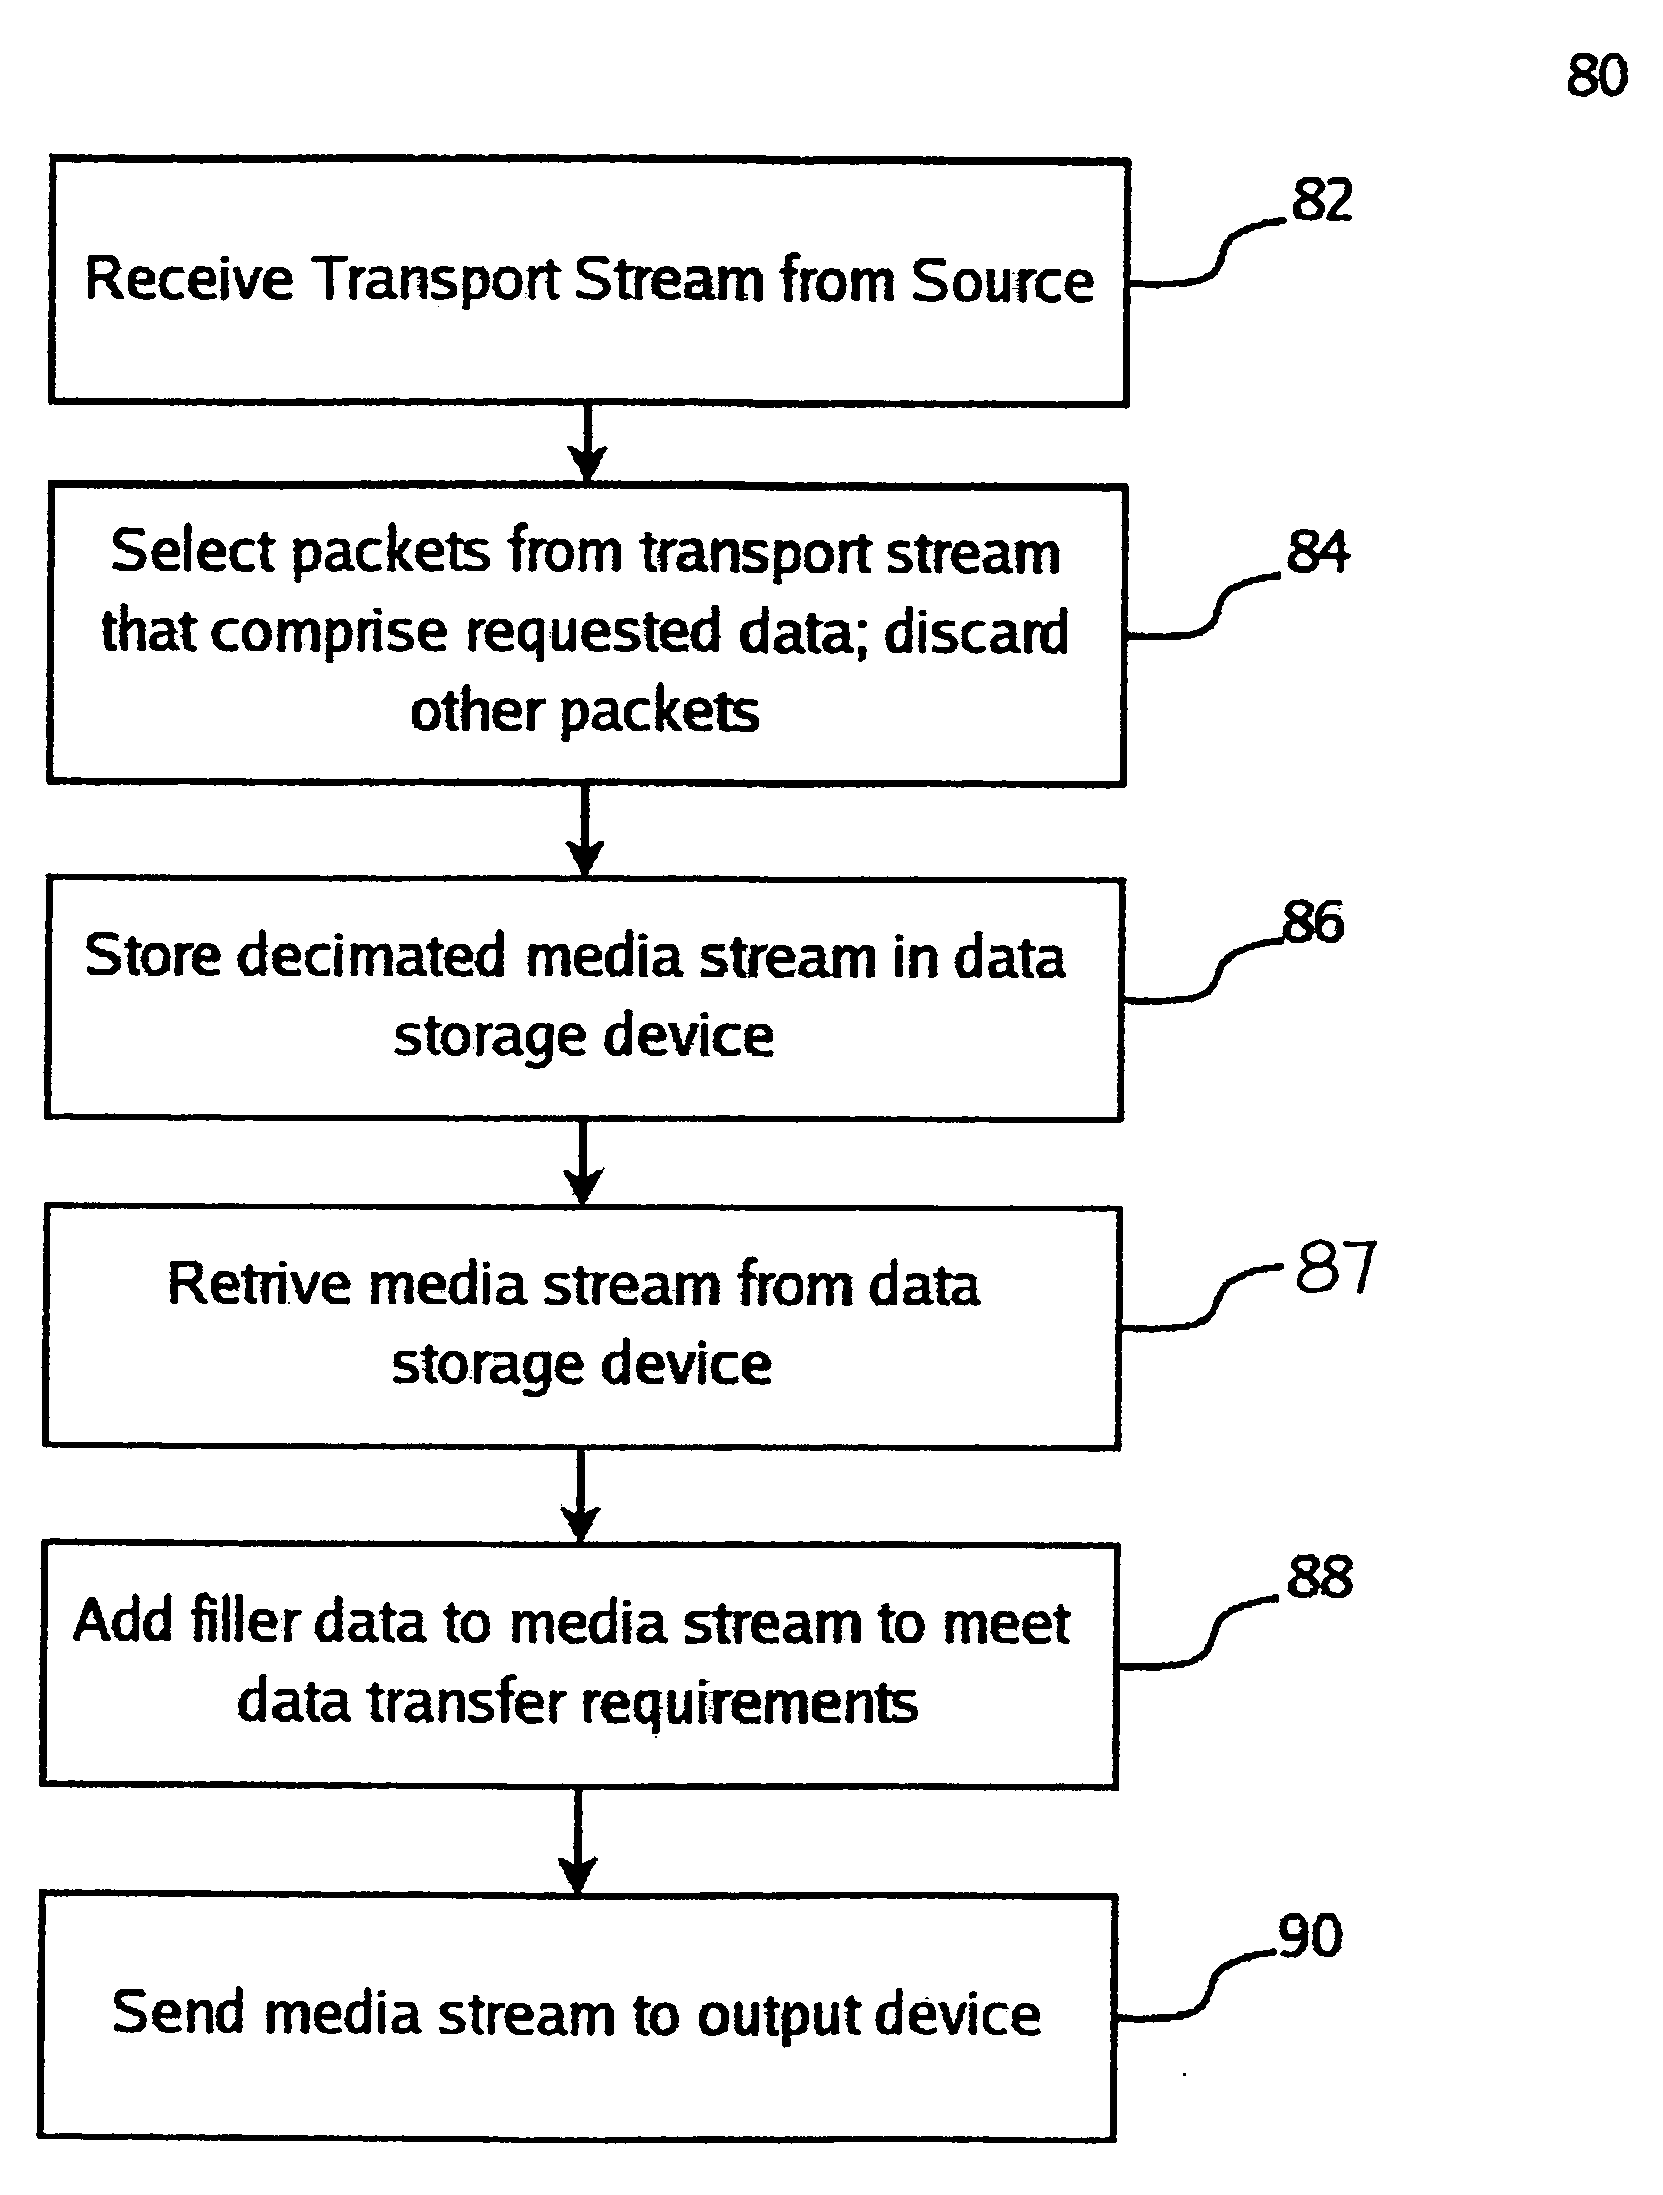 File system alteration of media files